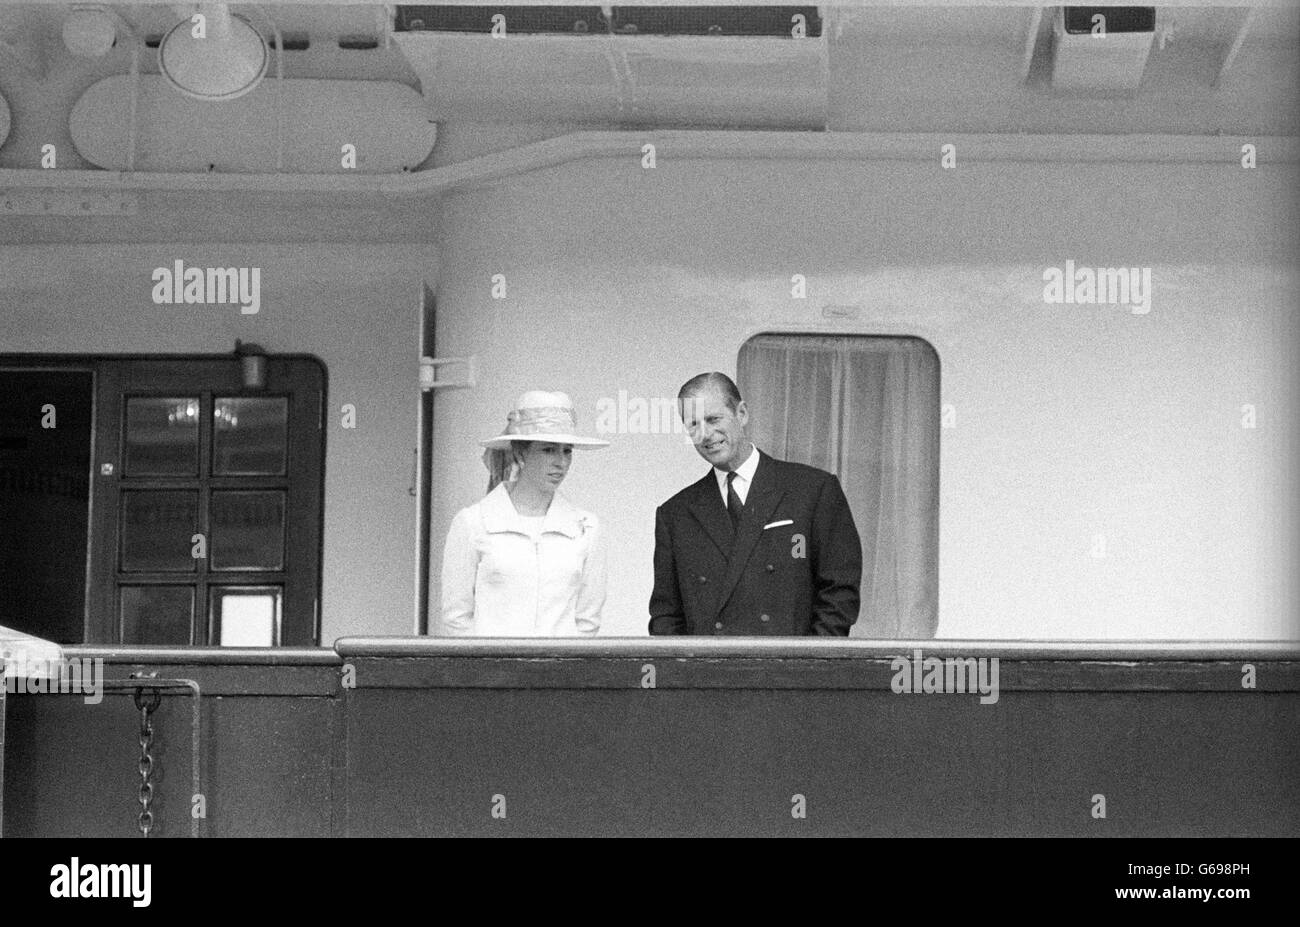 Prince Philip, The Duke of Edinburgh and Princess Anne aboard the Royal yacht Britannia shortly before leaving Southampton with The Queen and other Members of the Royal Family. Britannia is taking them to a Scottish port, where they will drive to Balmoral for their annual holiday Stock Photo